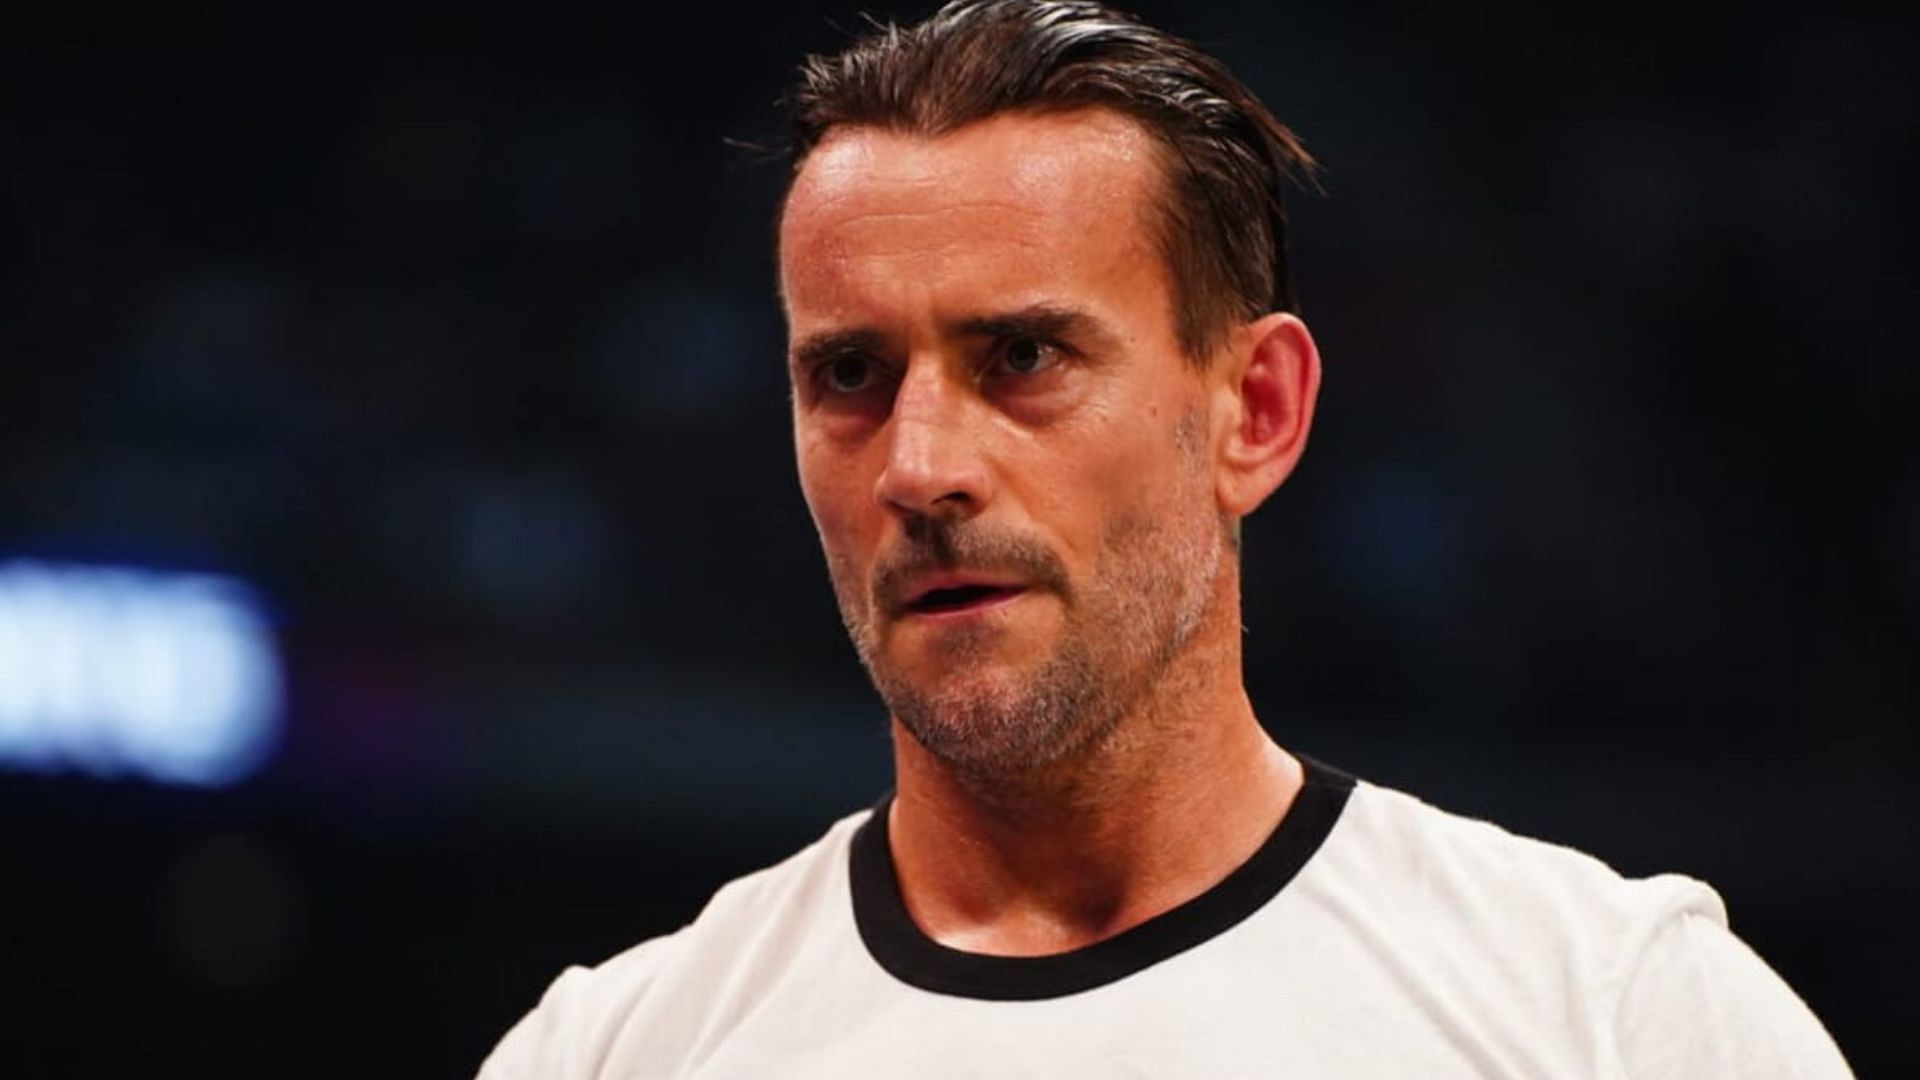 Will CM Punk have to face his issues with this star upon returning to AEW?